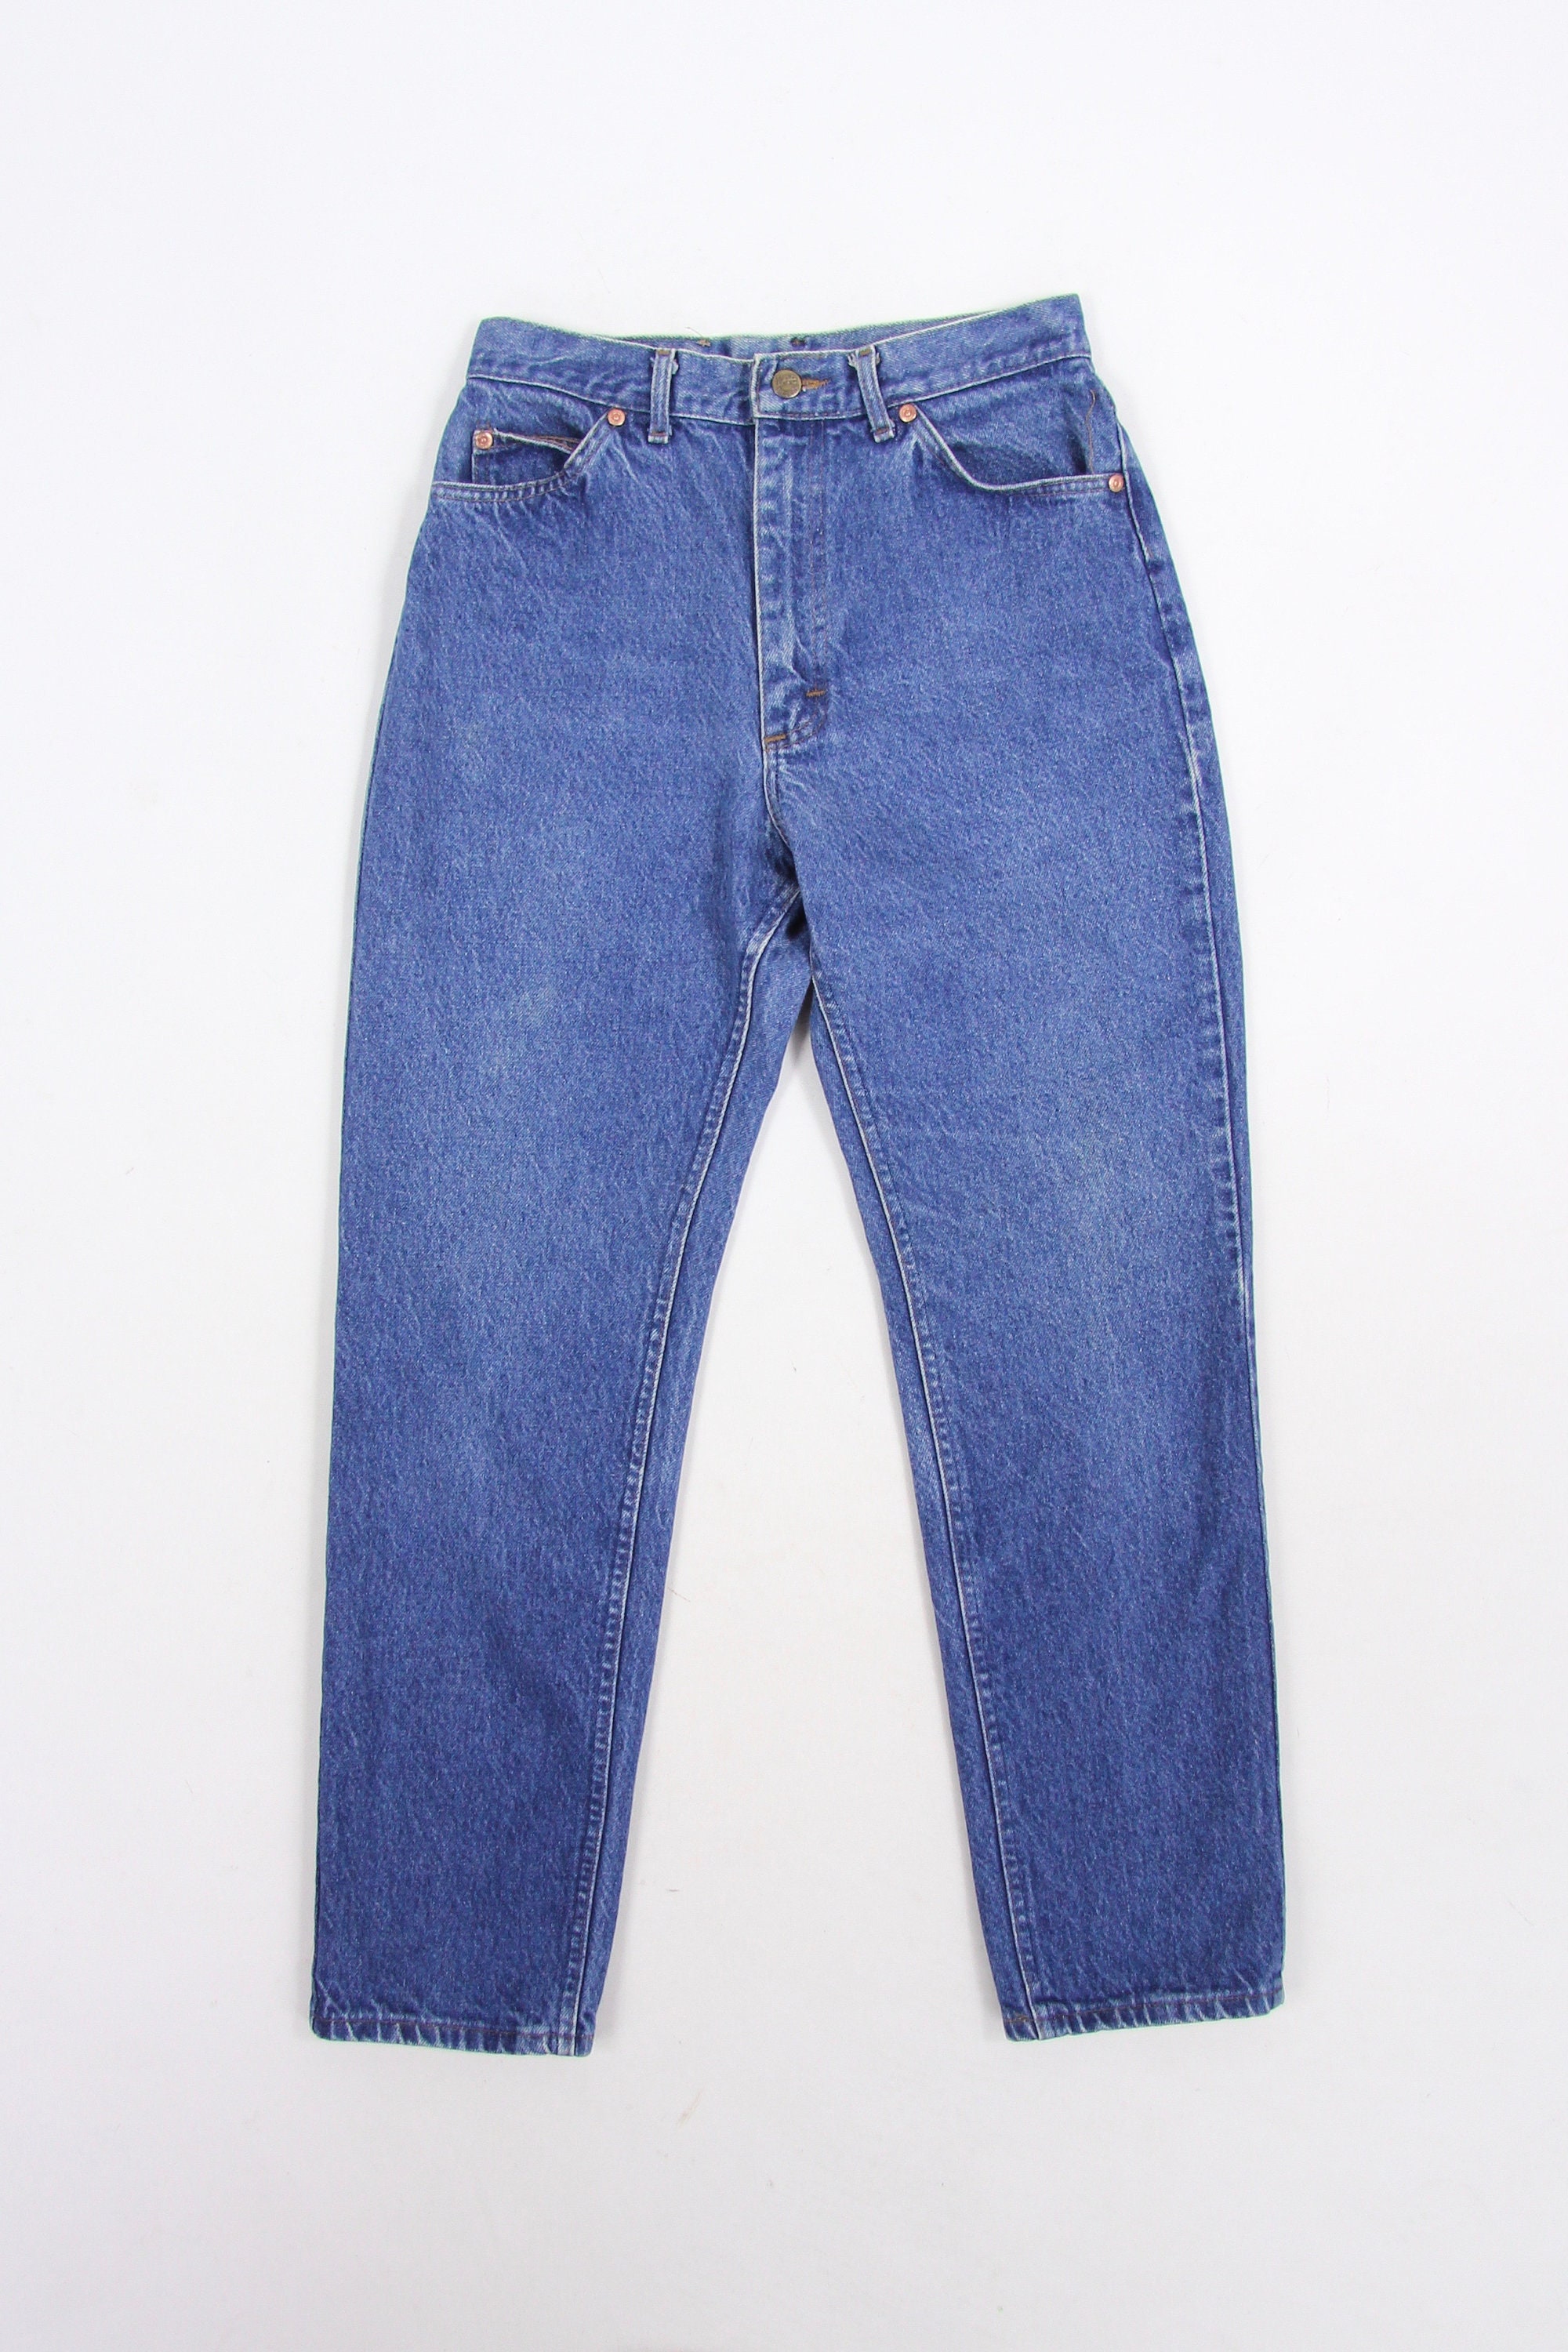 Lee High Waisted Jeans Tapered 90's Vintage Denim Pants Size 12 28.5 x 28.5